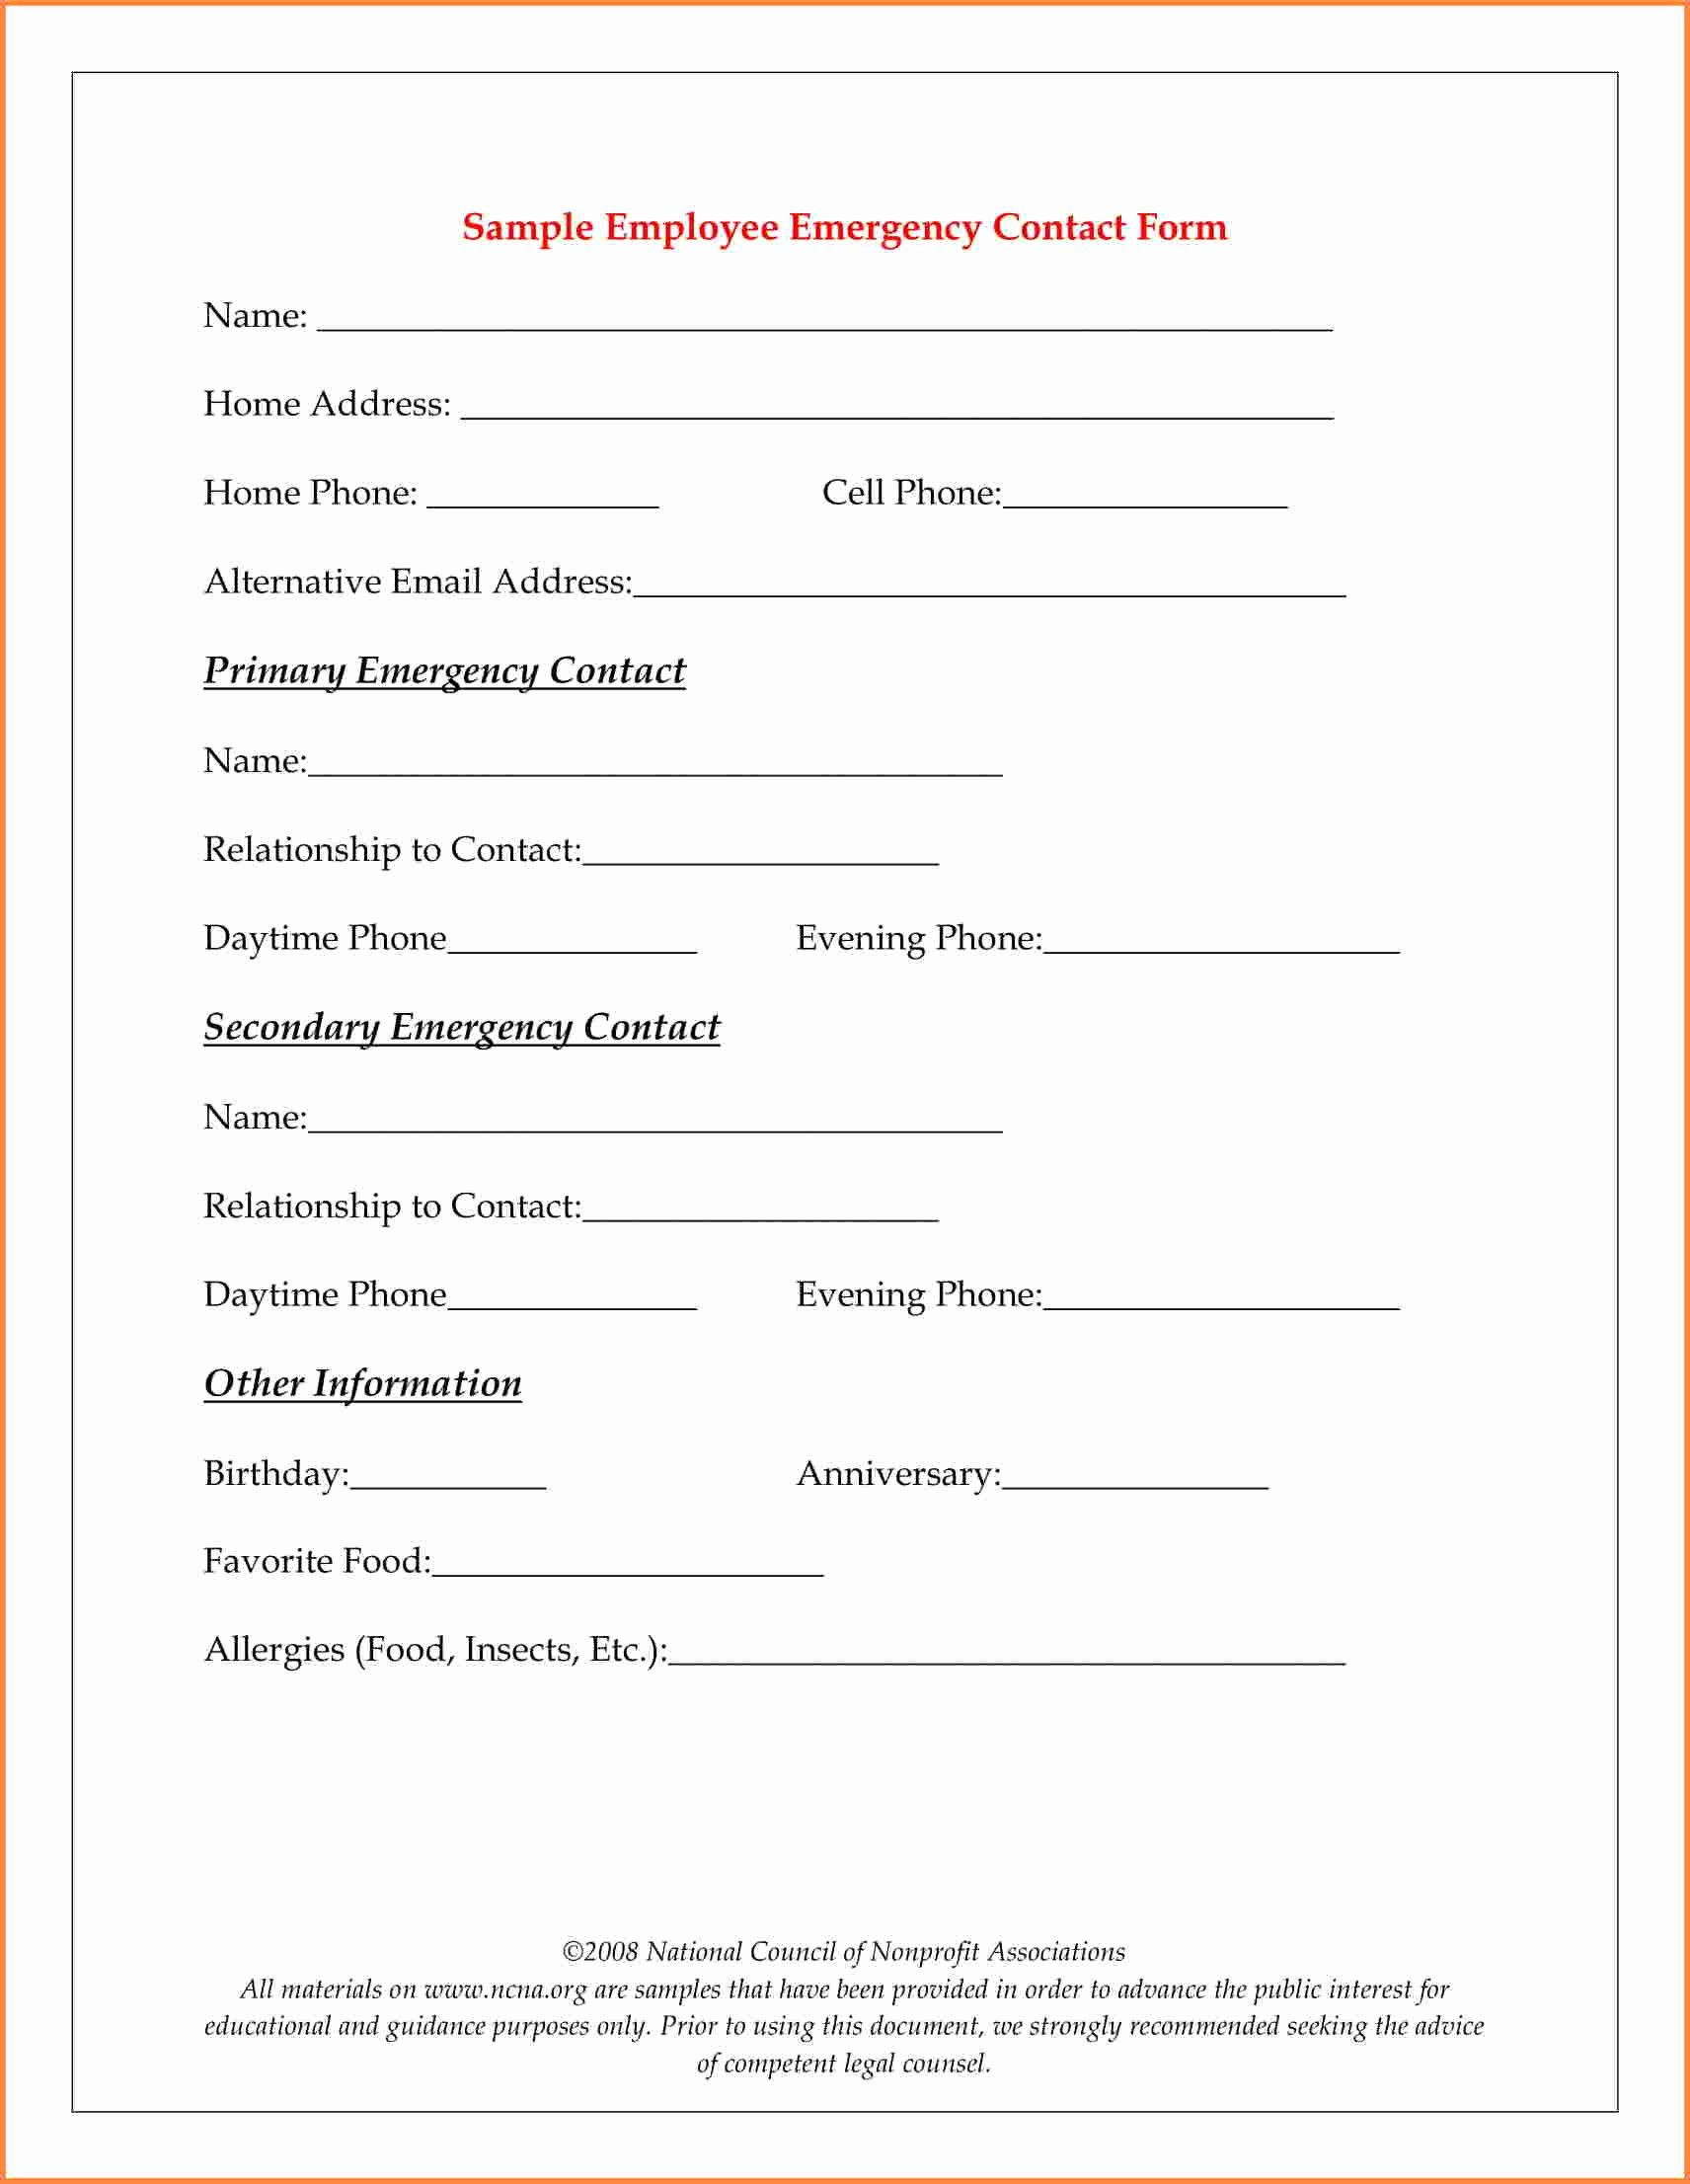 Emergency Contact form for Employers in 2020